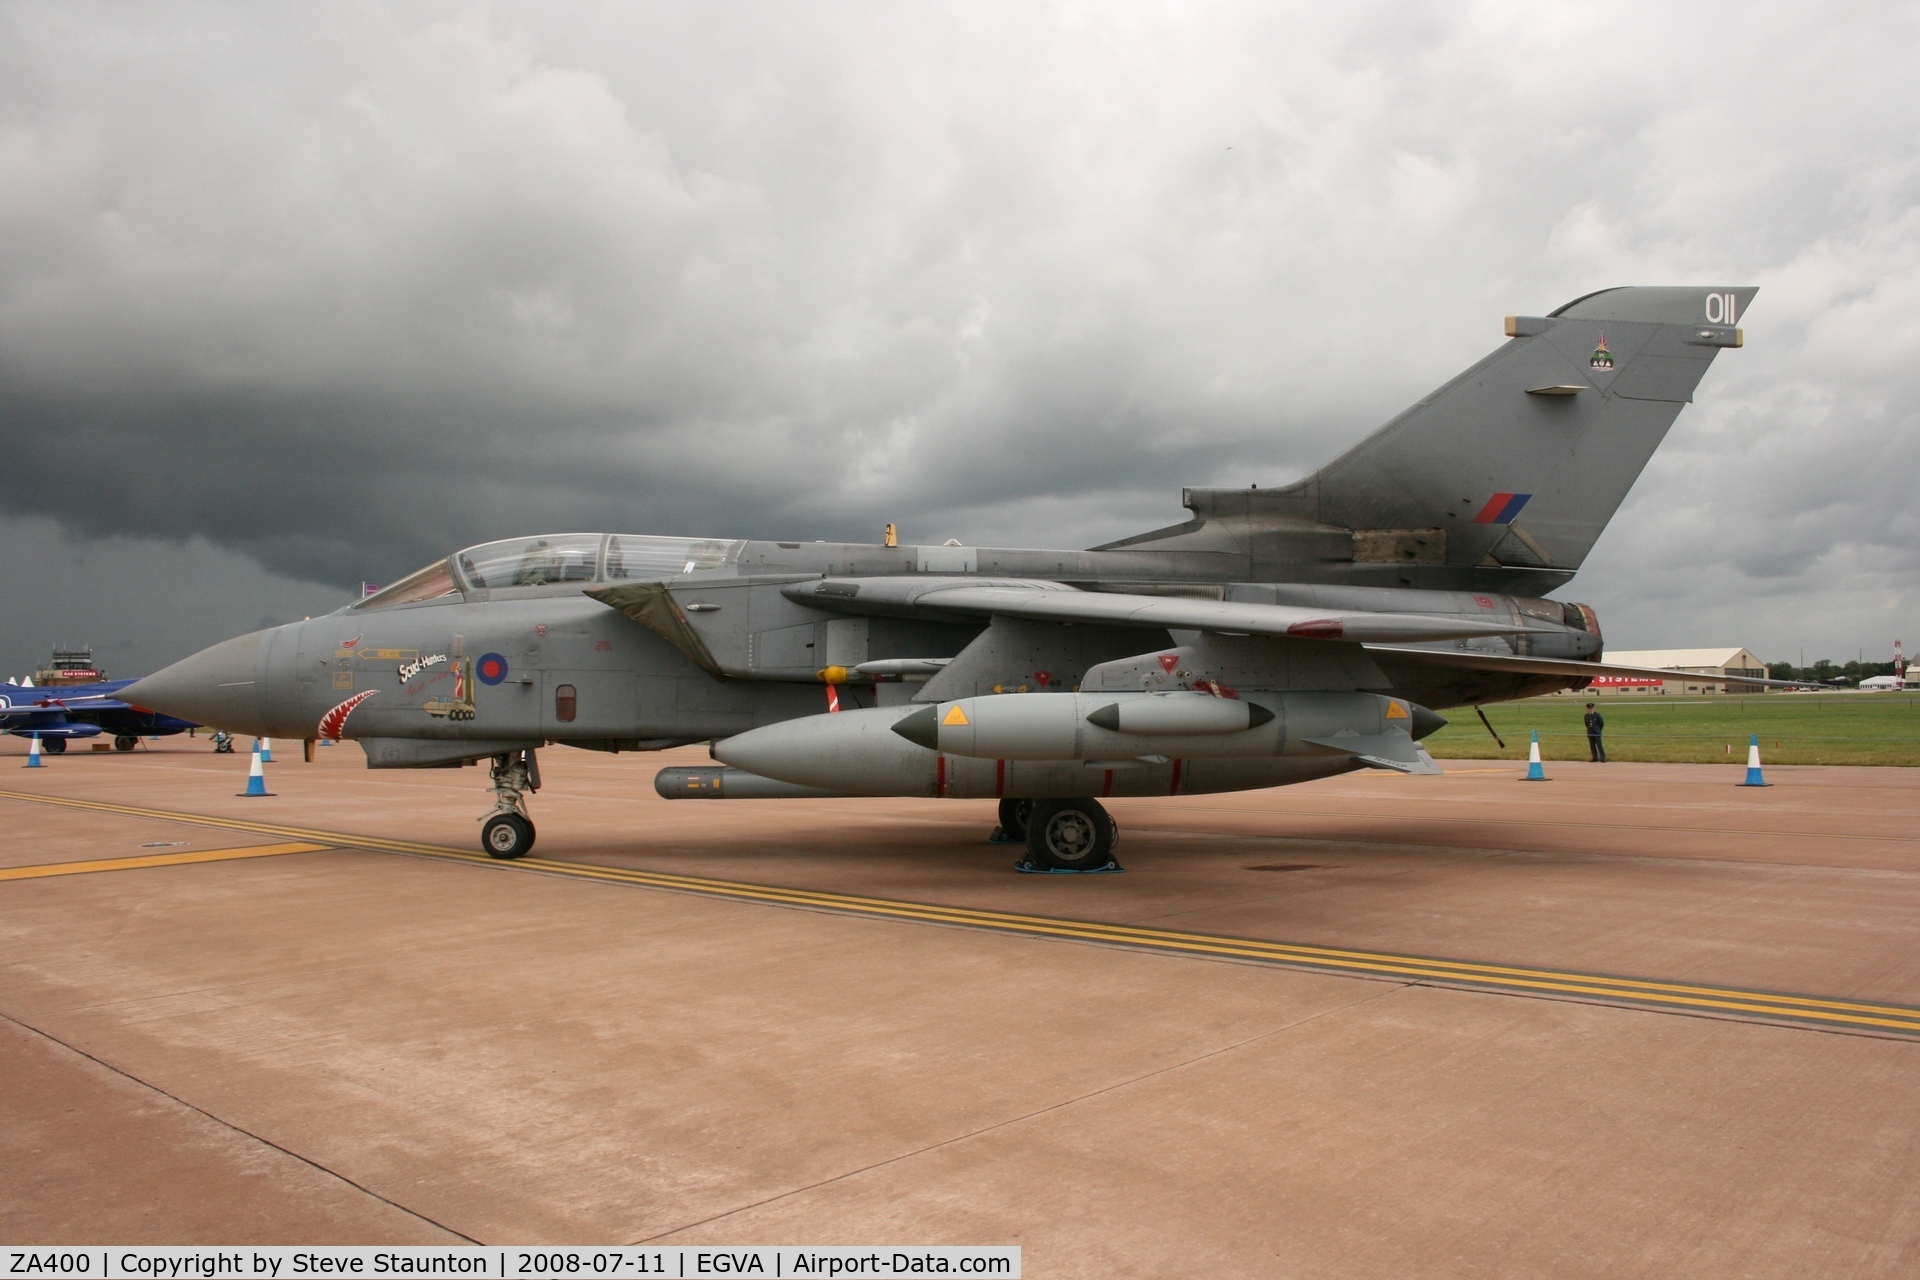 ZA400, 1982 Panavia Tornado GR.4A C/N 204/BS067/3099, Taken at the Royal International Air Tattoo 2008 during arrivals and departures (show days cancelled due to bad weather)